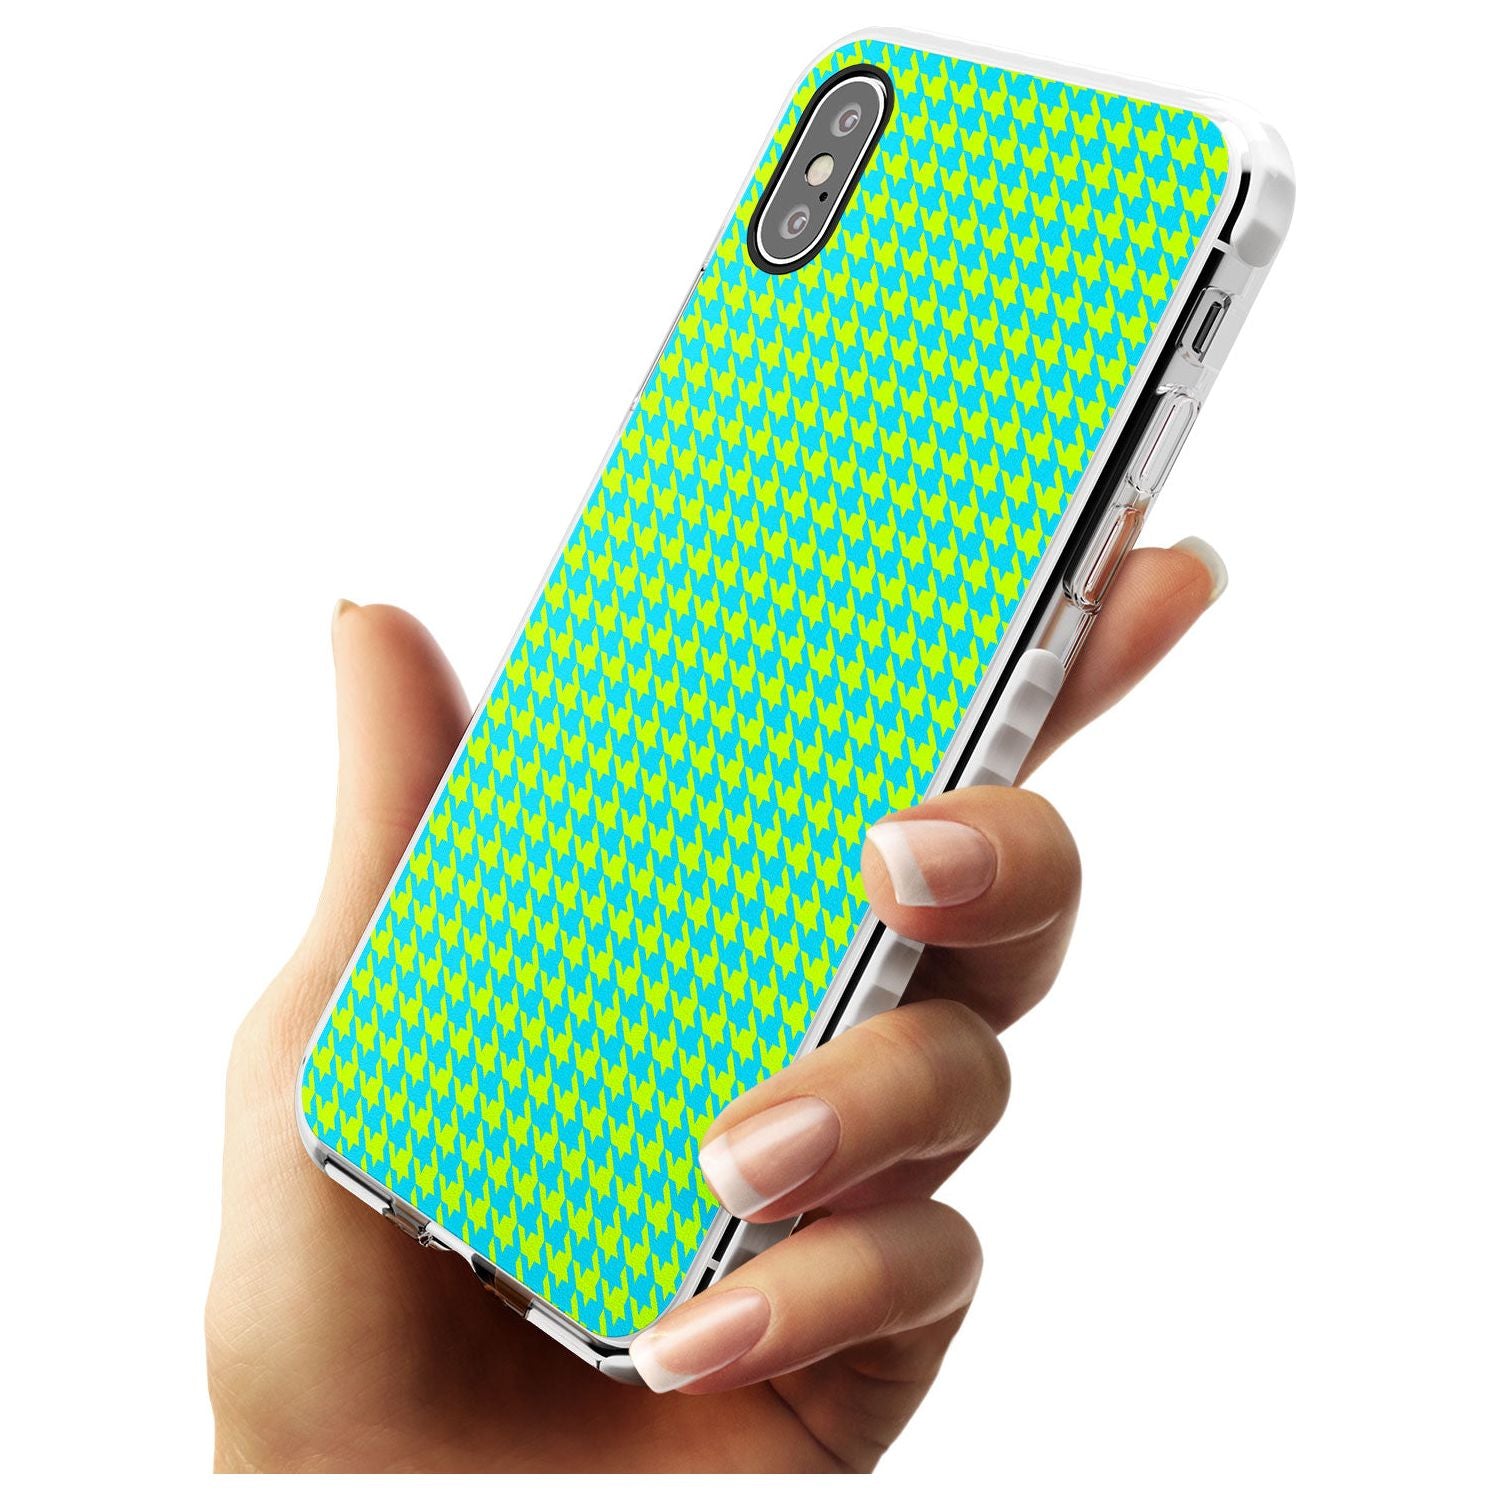 Neon Lime & Turquoise Houndstooth Pattern Impact Phone Case for iPhone X XS Max XR